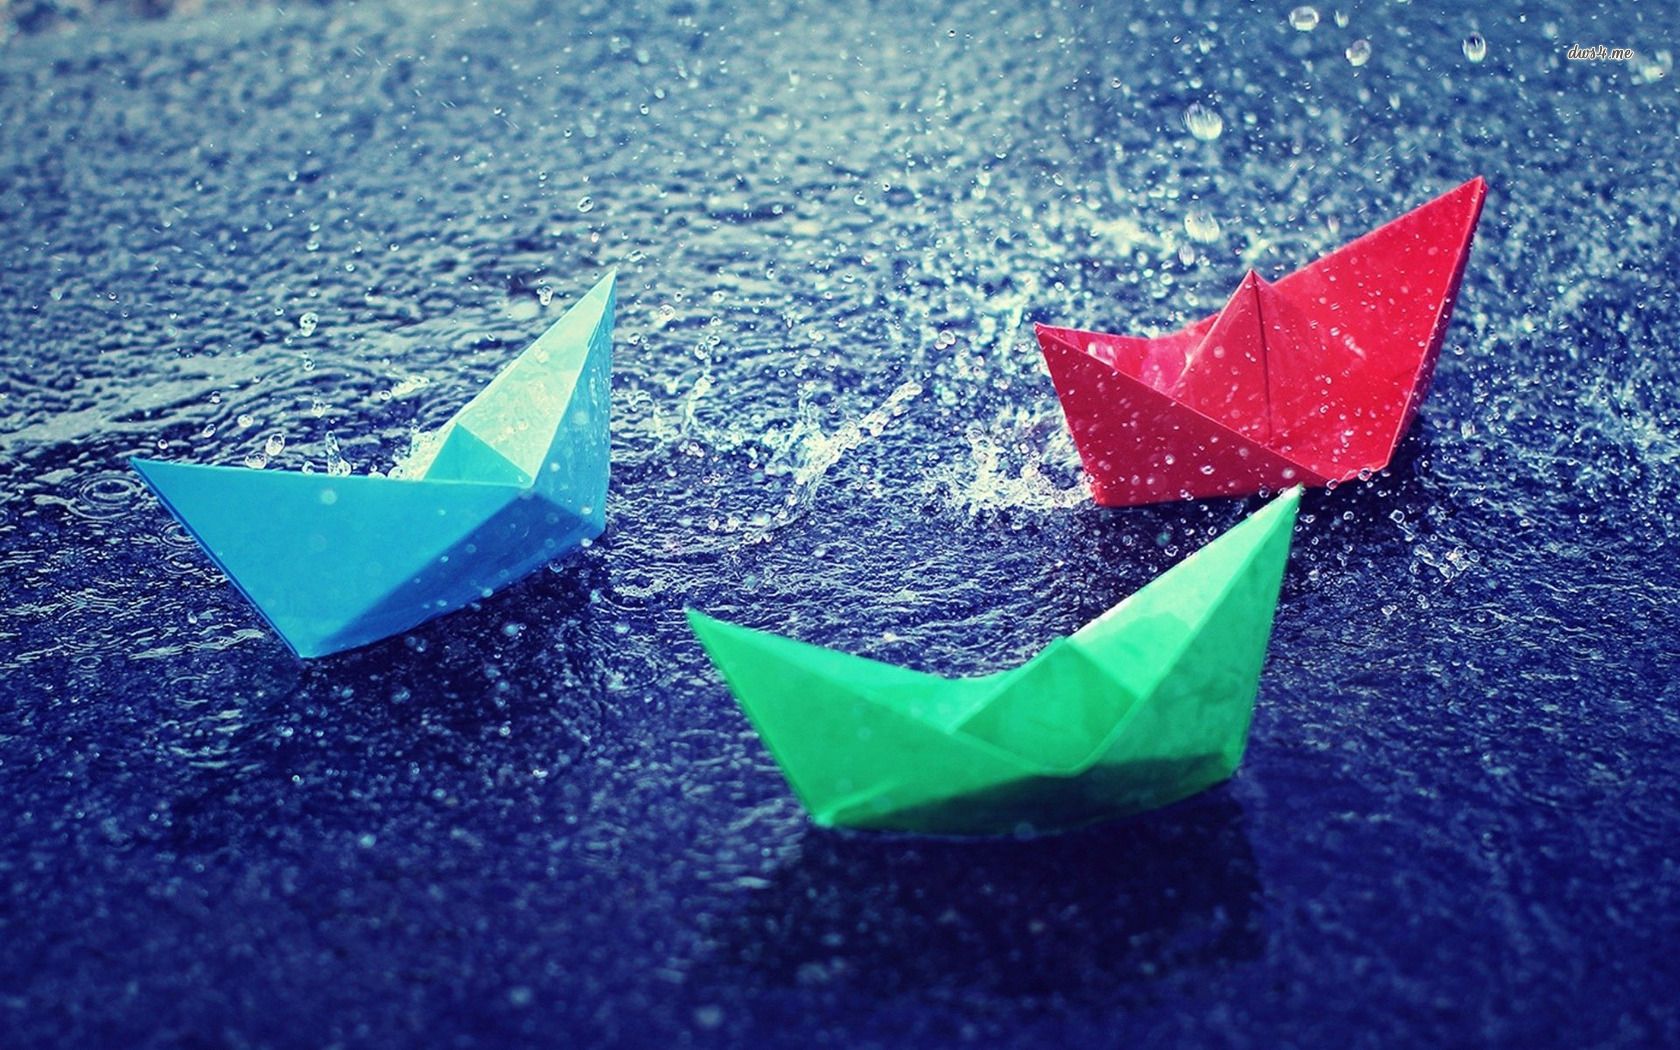 Colorful paper boats in the rain wallpaper - Photography ...